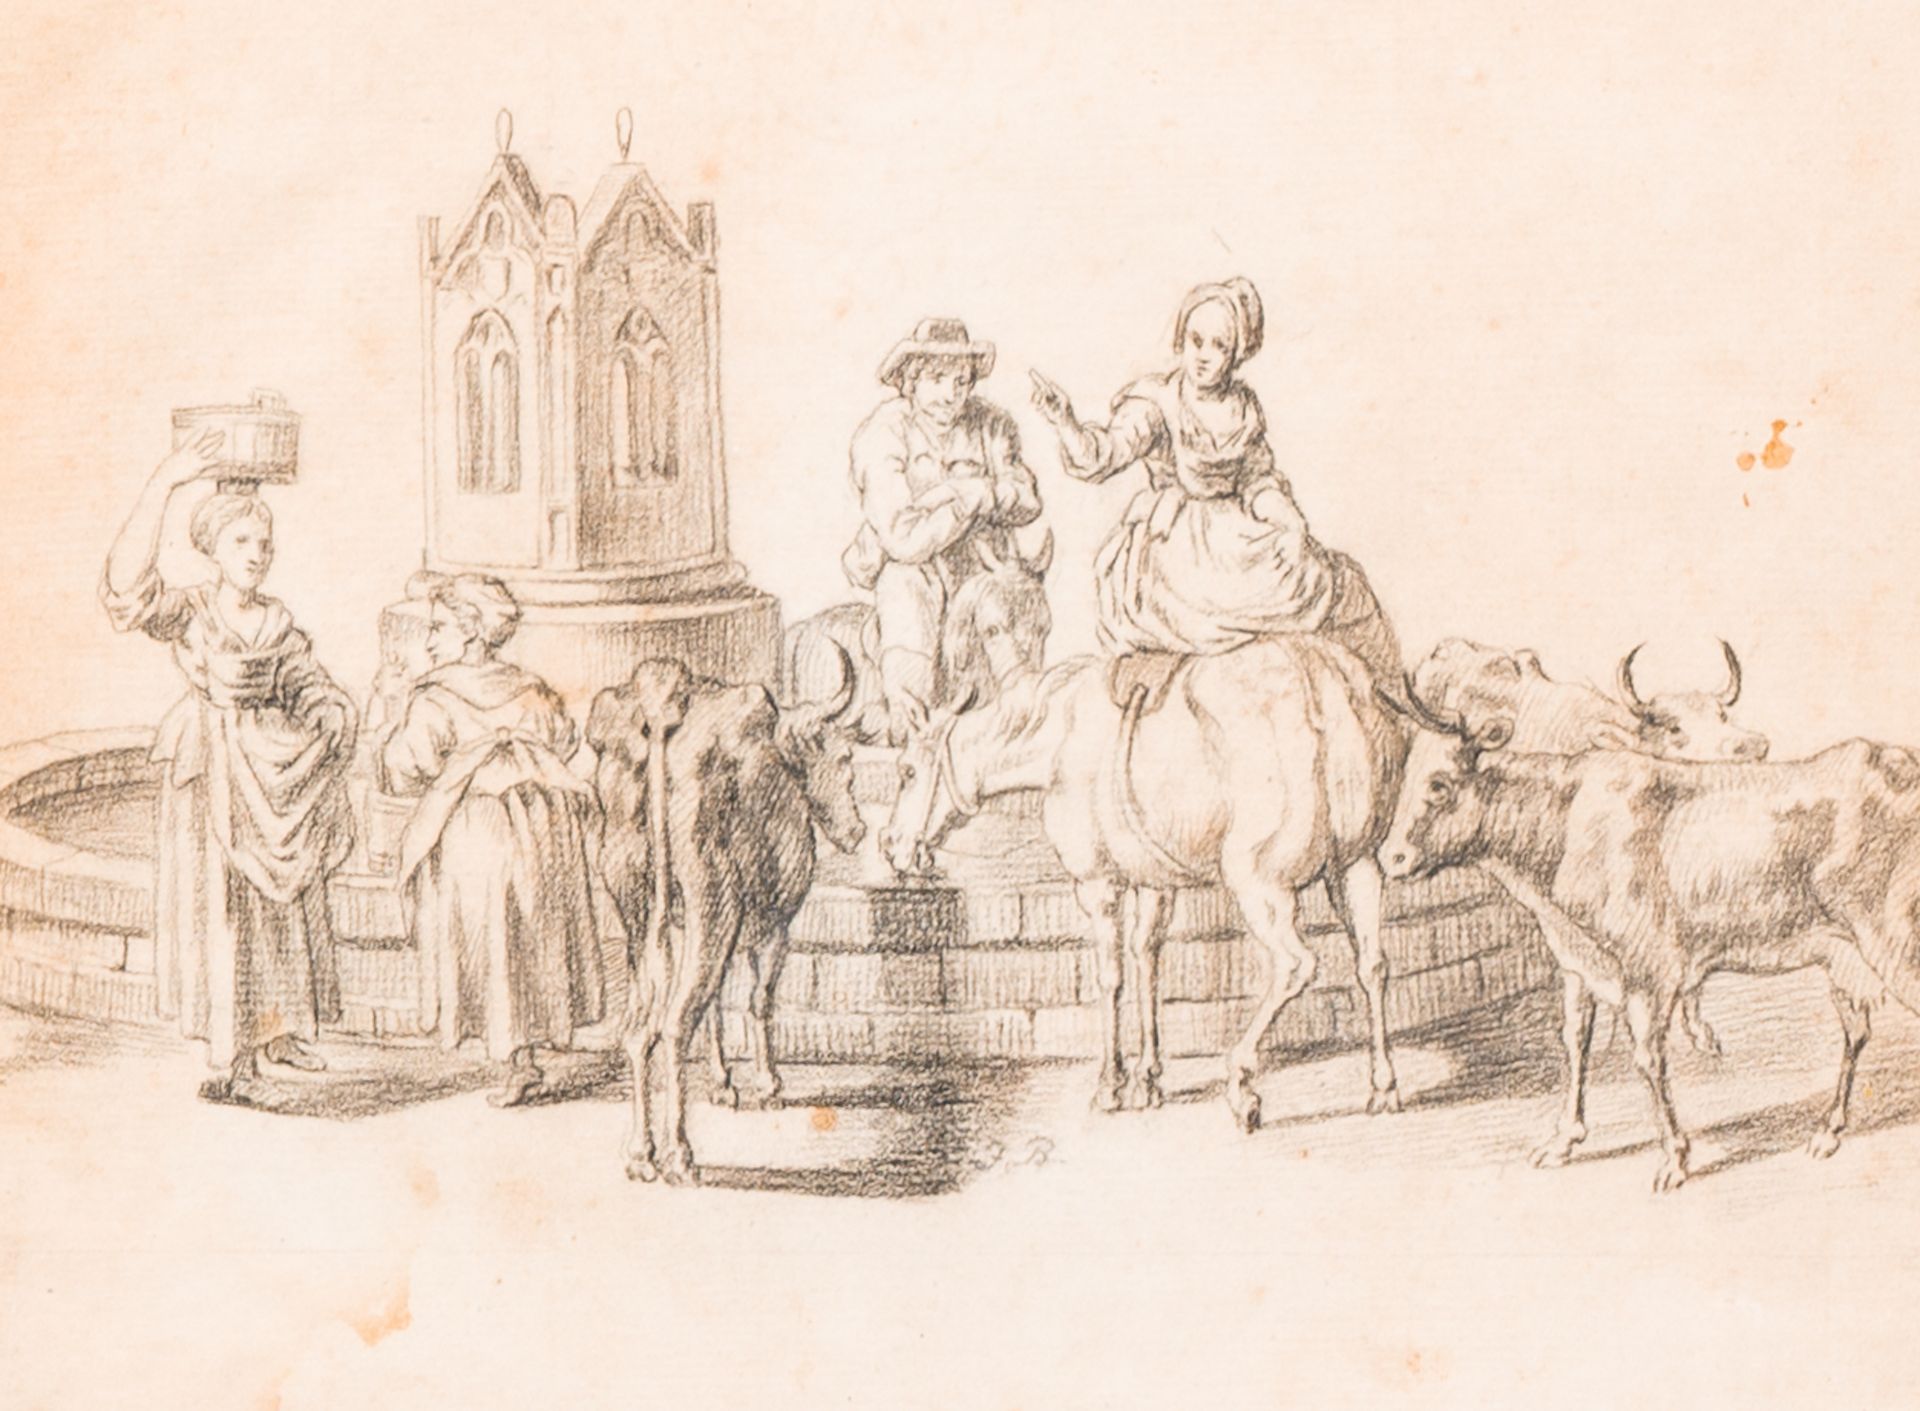 Monogrammed F.B. (?): Shepherds with their cattle at a fountain, pencil on paper, 19th C.